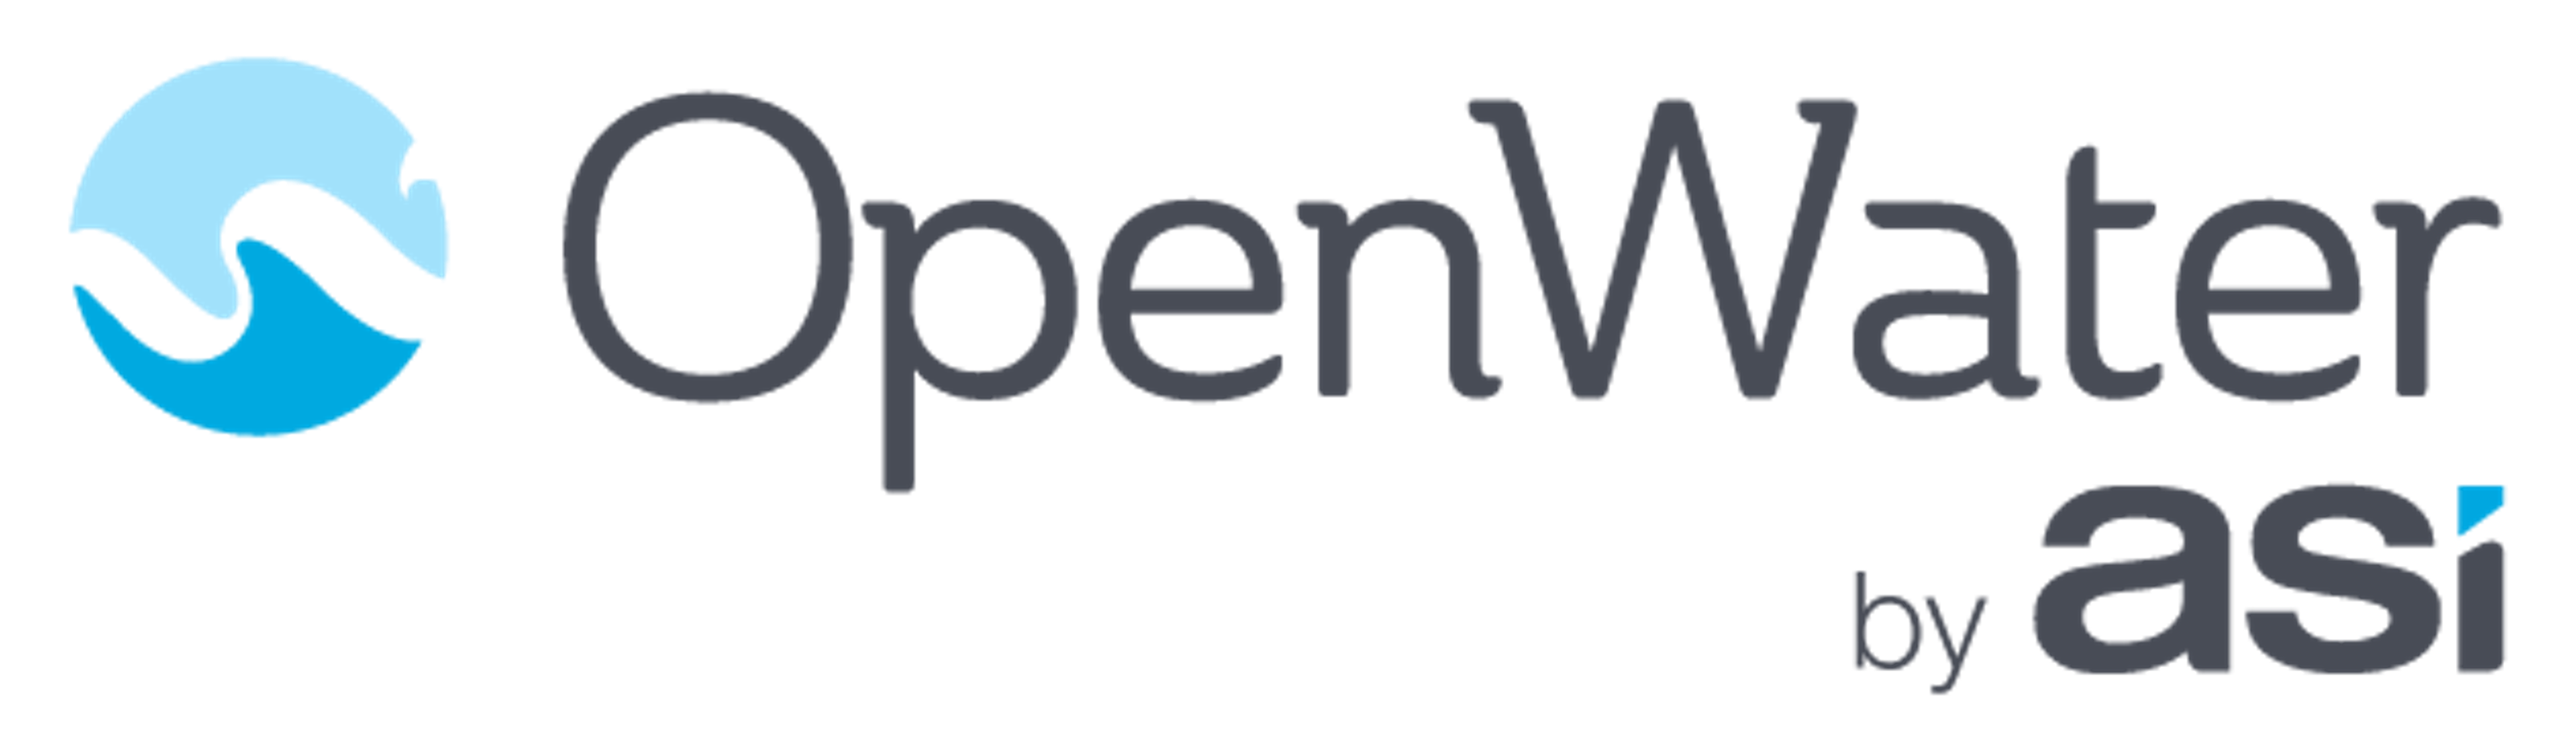 OpenWater Logo